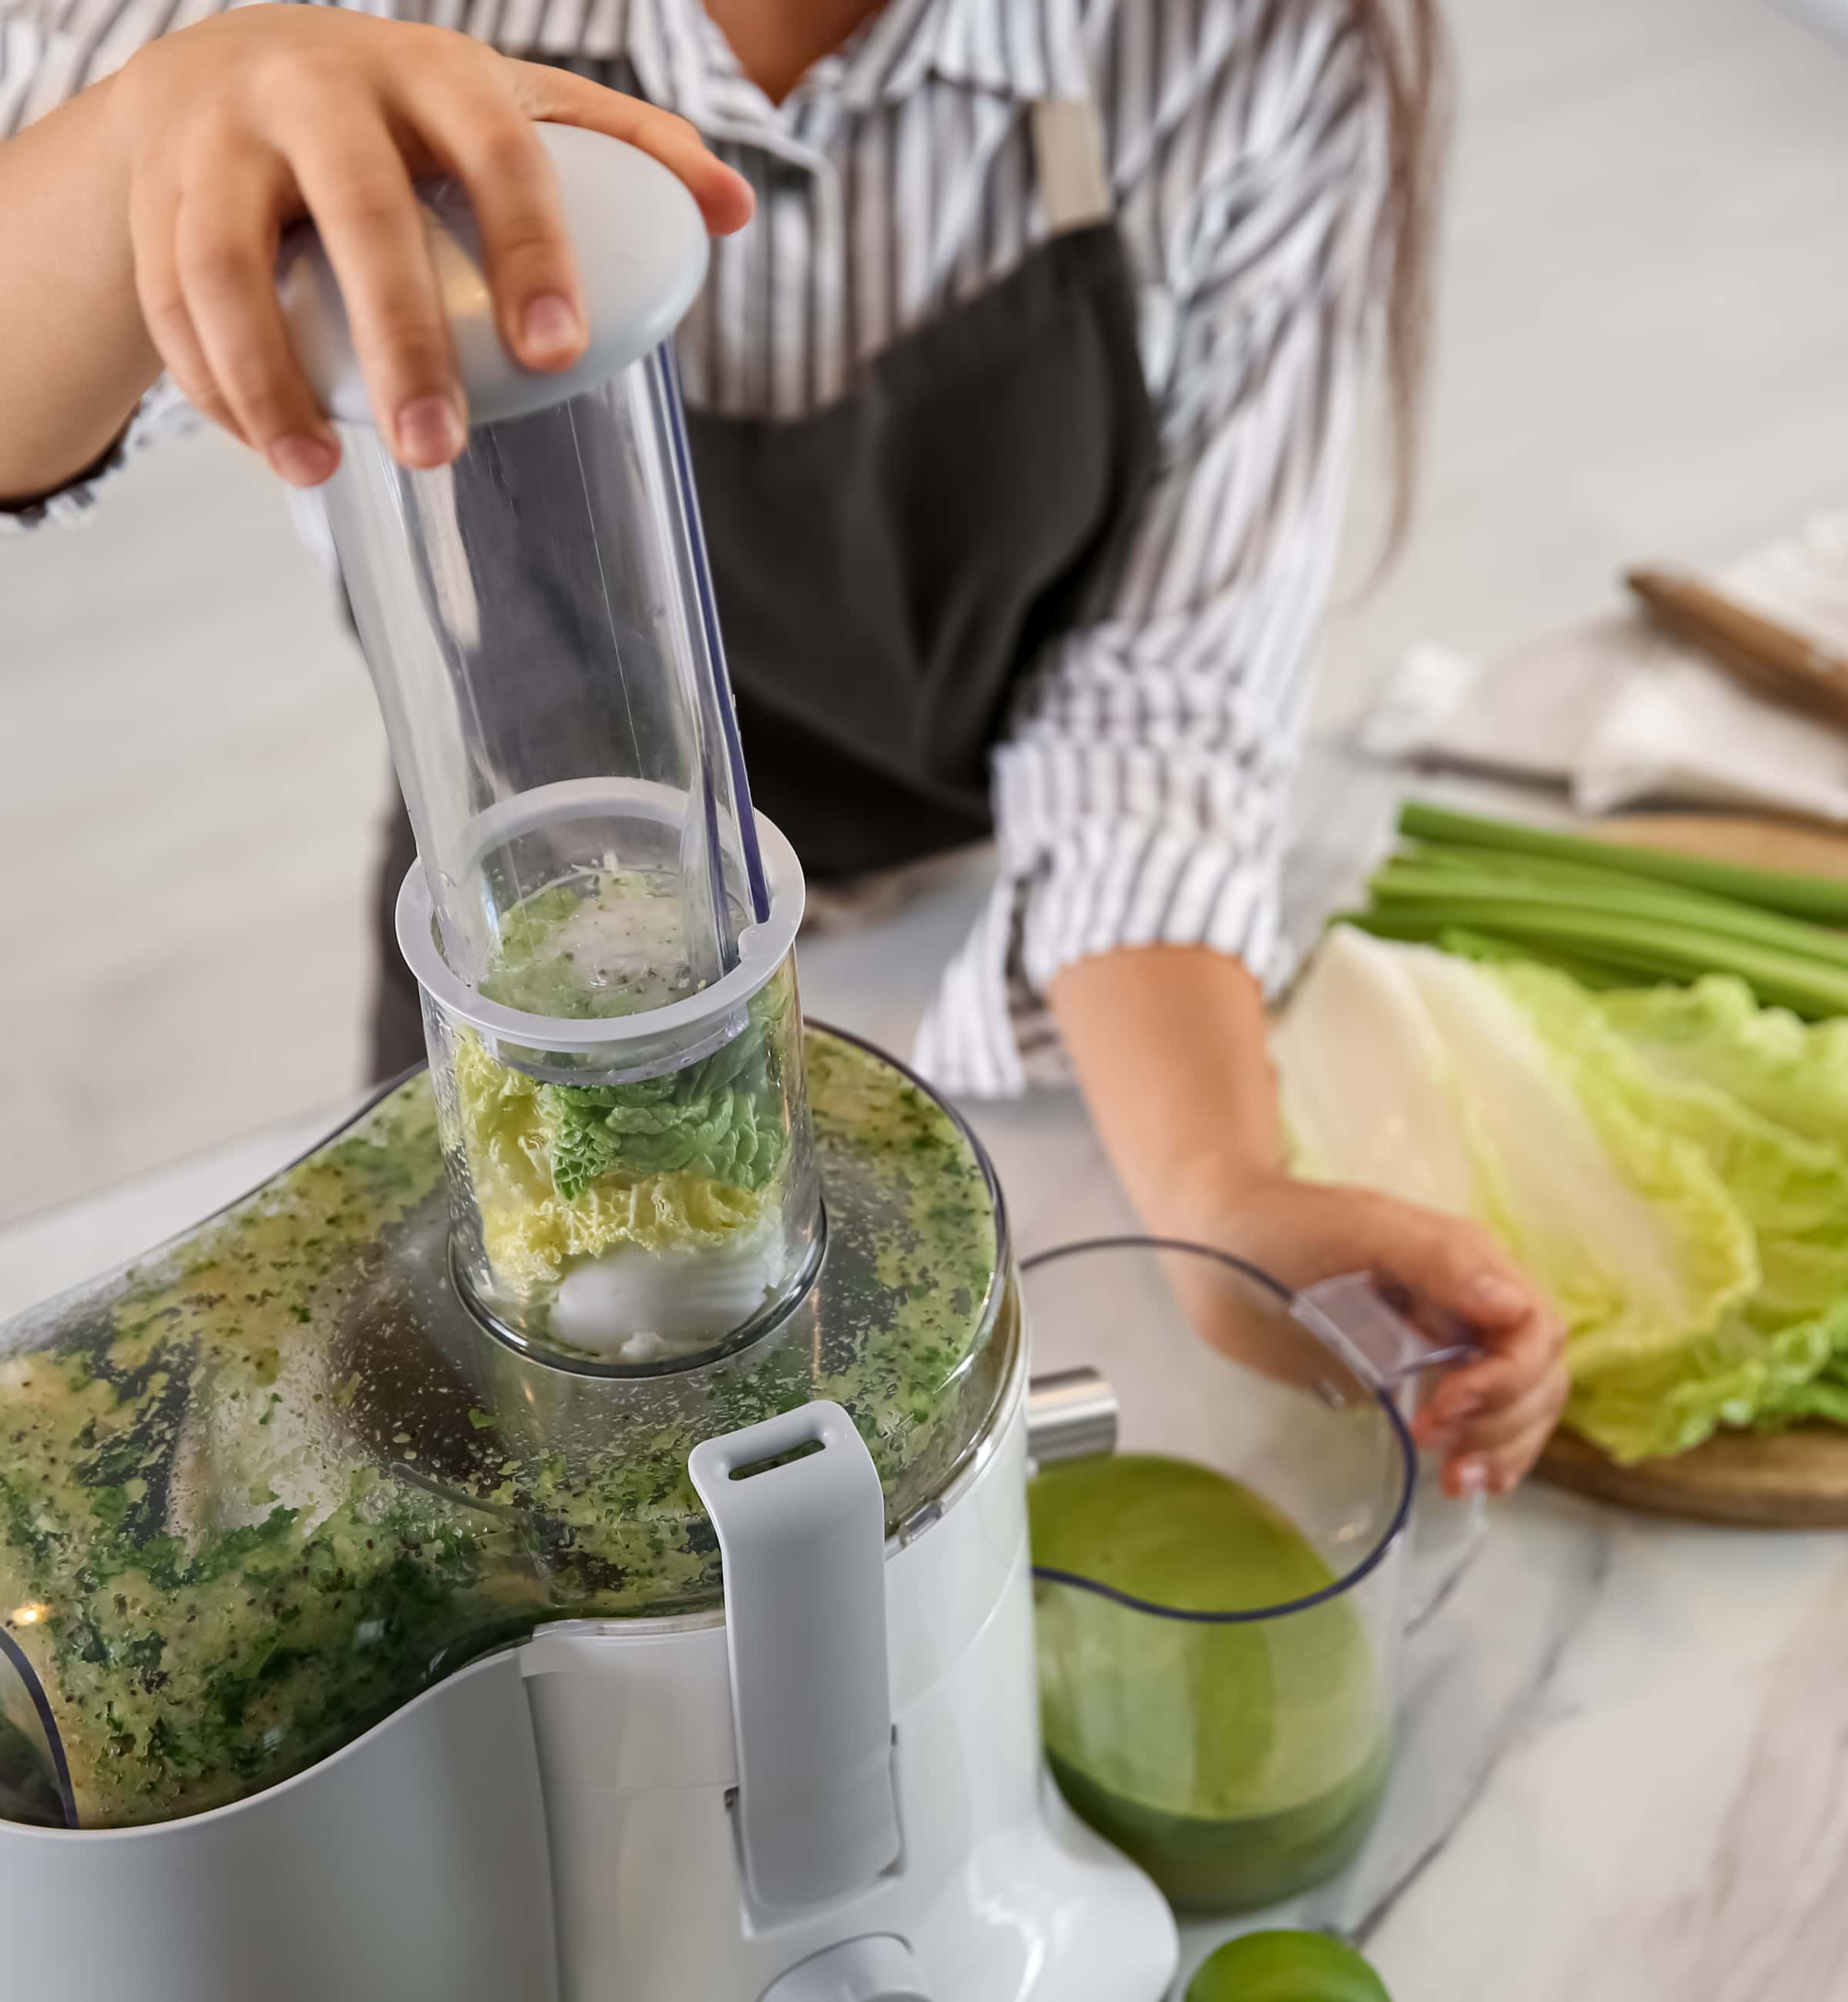 Juicing Cabbages At Home